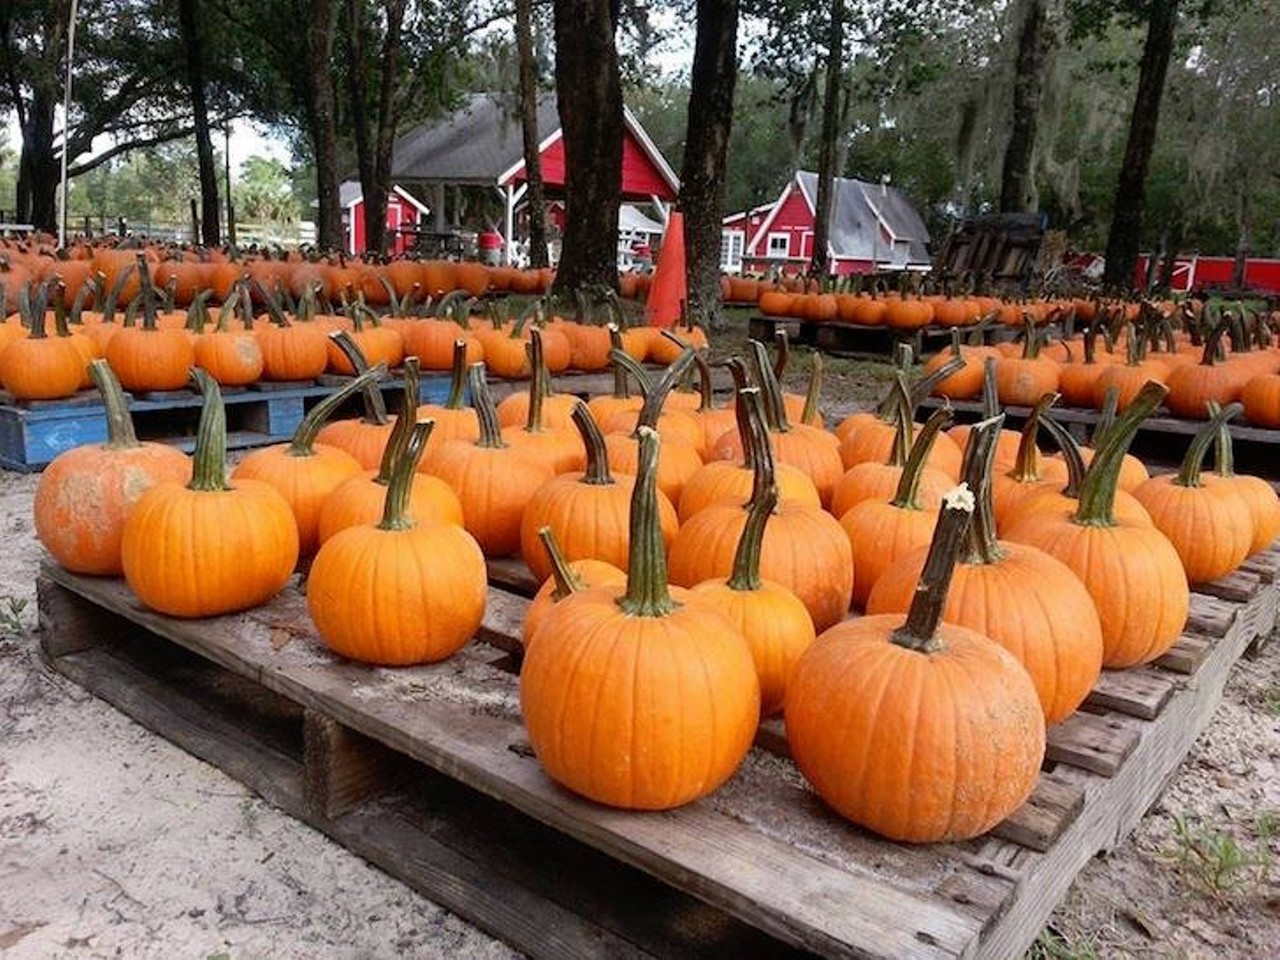 Santa&#146;s Christmas Tree Forest
35317 Huff Road, Eustis, 352-357-9863
Christmas may be a couple months away, but you can still have fun at Santa&#146;s Christmas Tree Forest this fall. A pumpkin patch, mazes, photo ops, unlimited hayrides, horse rides, ziplines, duck races and a petting zoo are available for you to enjoy on the weekends, starting Sept. 30 - Oct. 29. General admission is $3 with additional costs for other activities ranging between $3- $18.
Photo via Santa&#146;s Christmas Tree Forest/Facebook